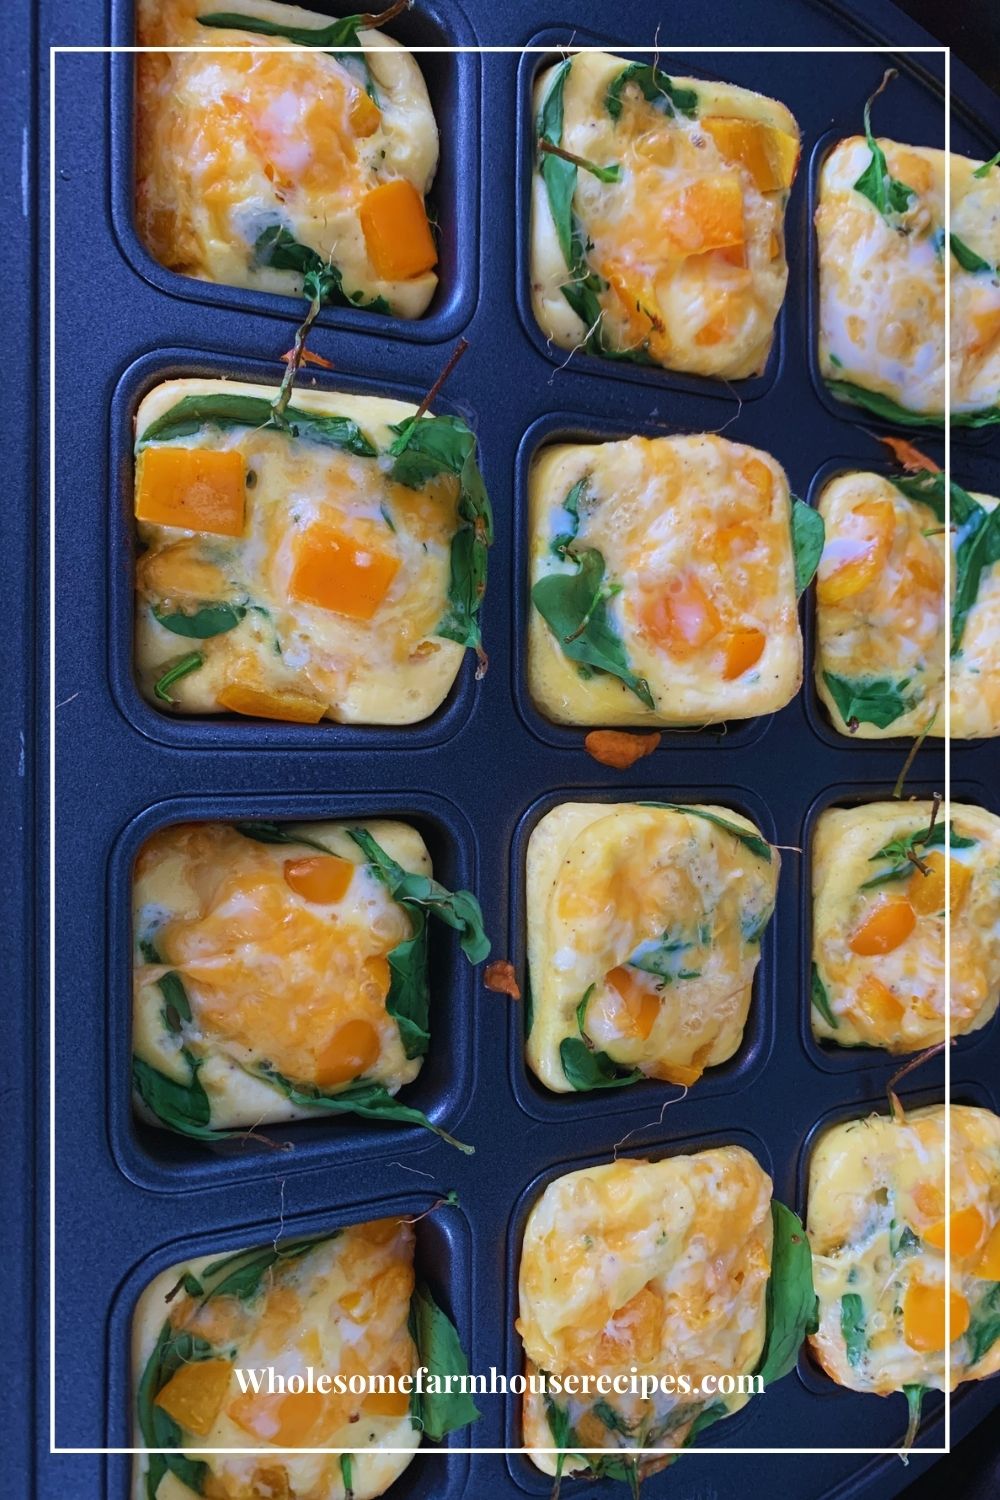 Spinach Egg and Cheese Egg Bites